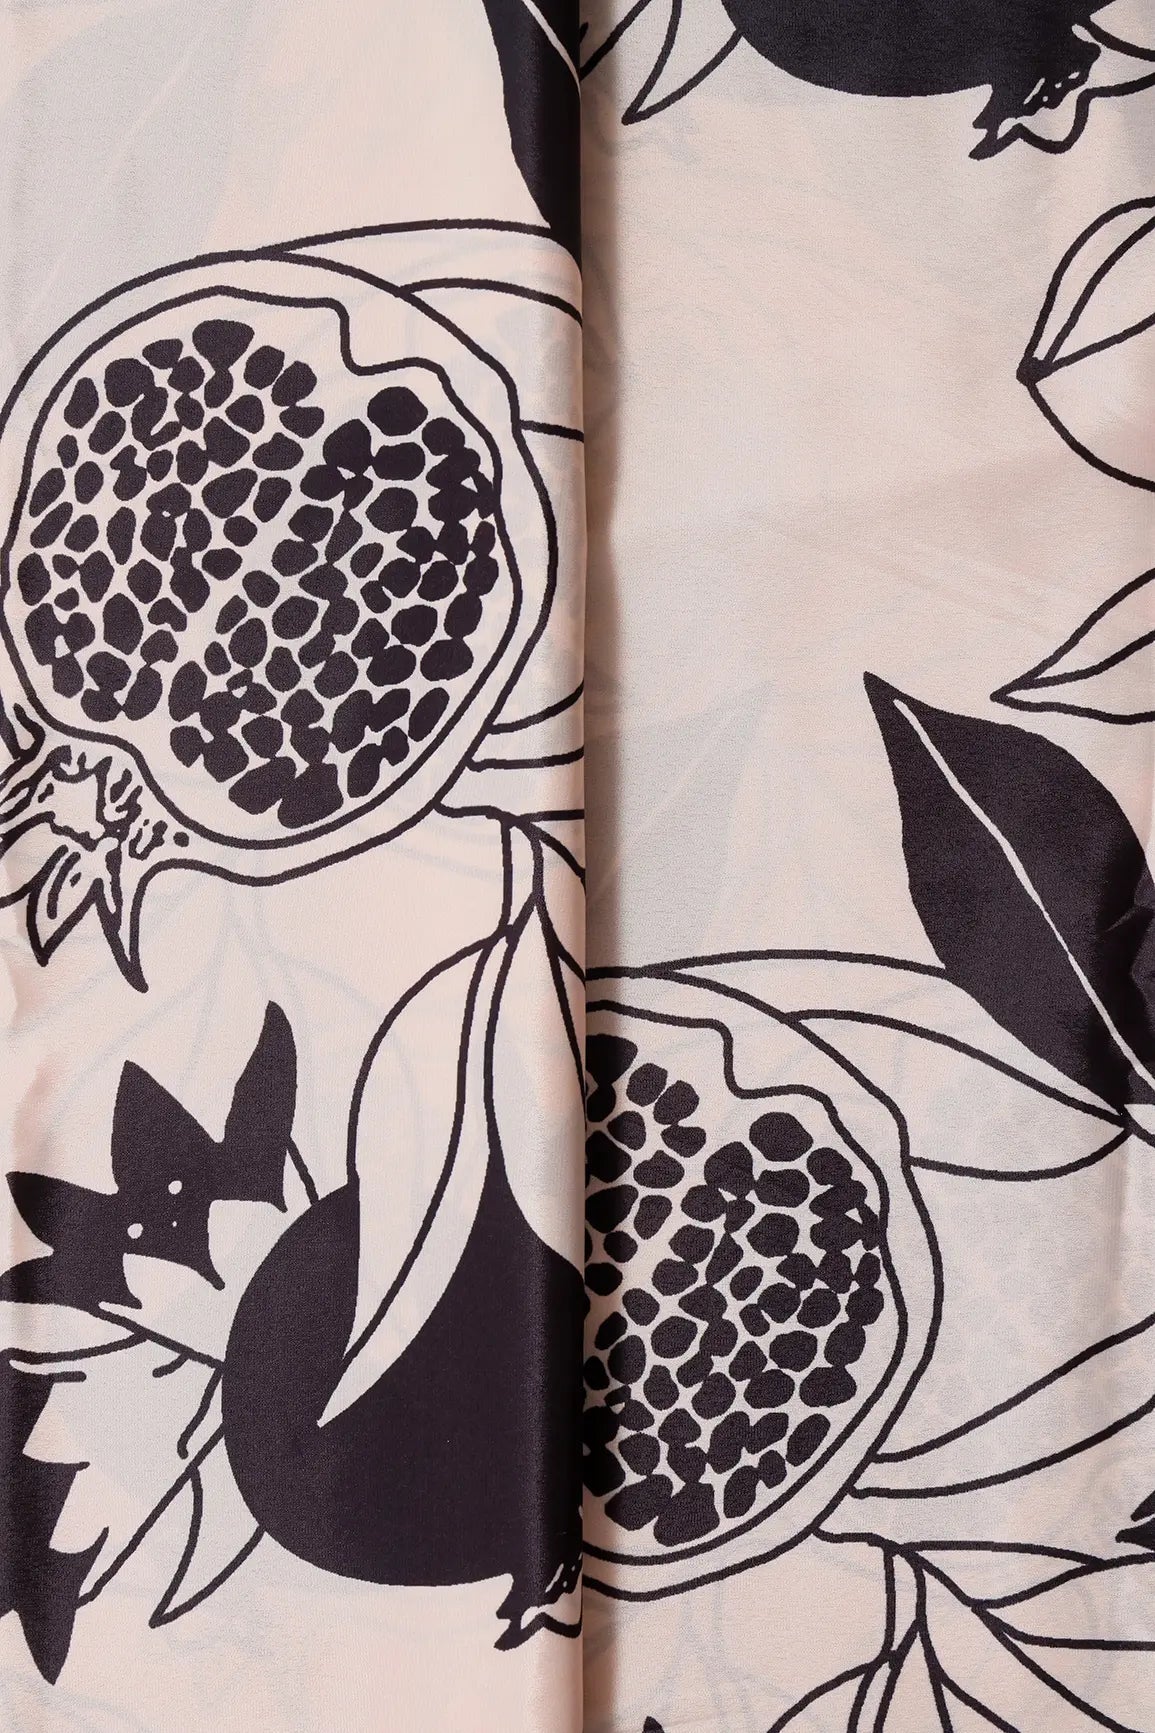 Black And Cream Floral Pattern Digital Print On French Crepe Fabric - doeraa